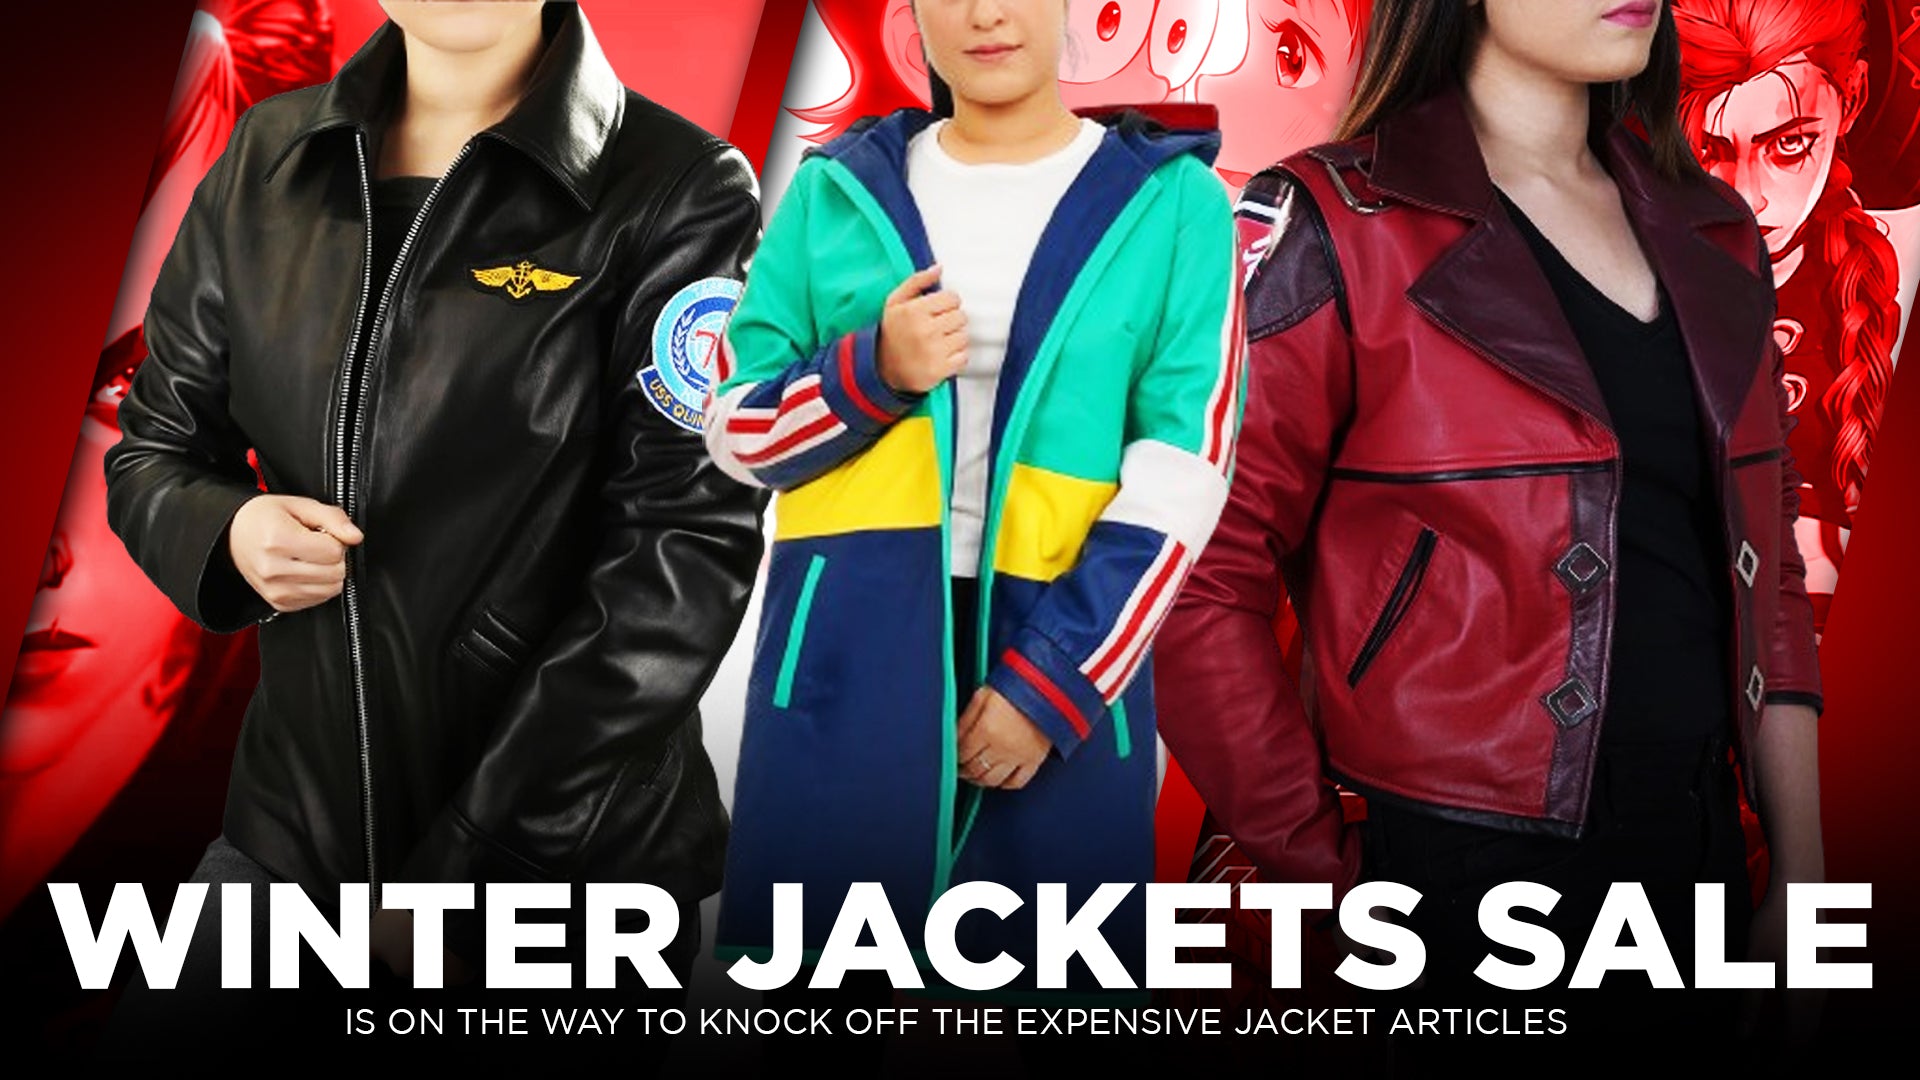 Winter Jackets Sale Is On the Way to Knock Off The Expensive Jacket Articles